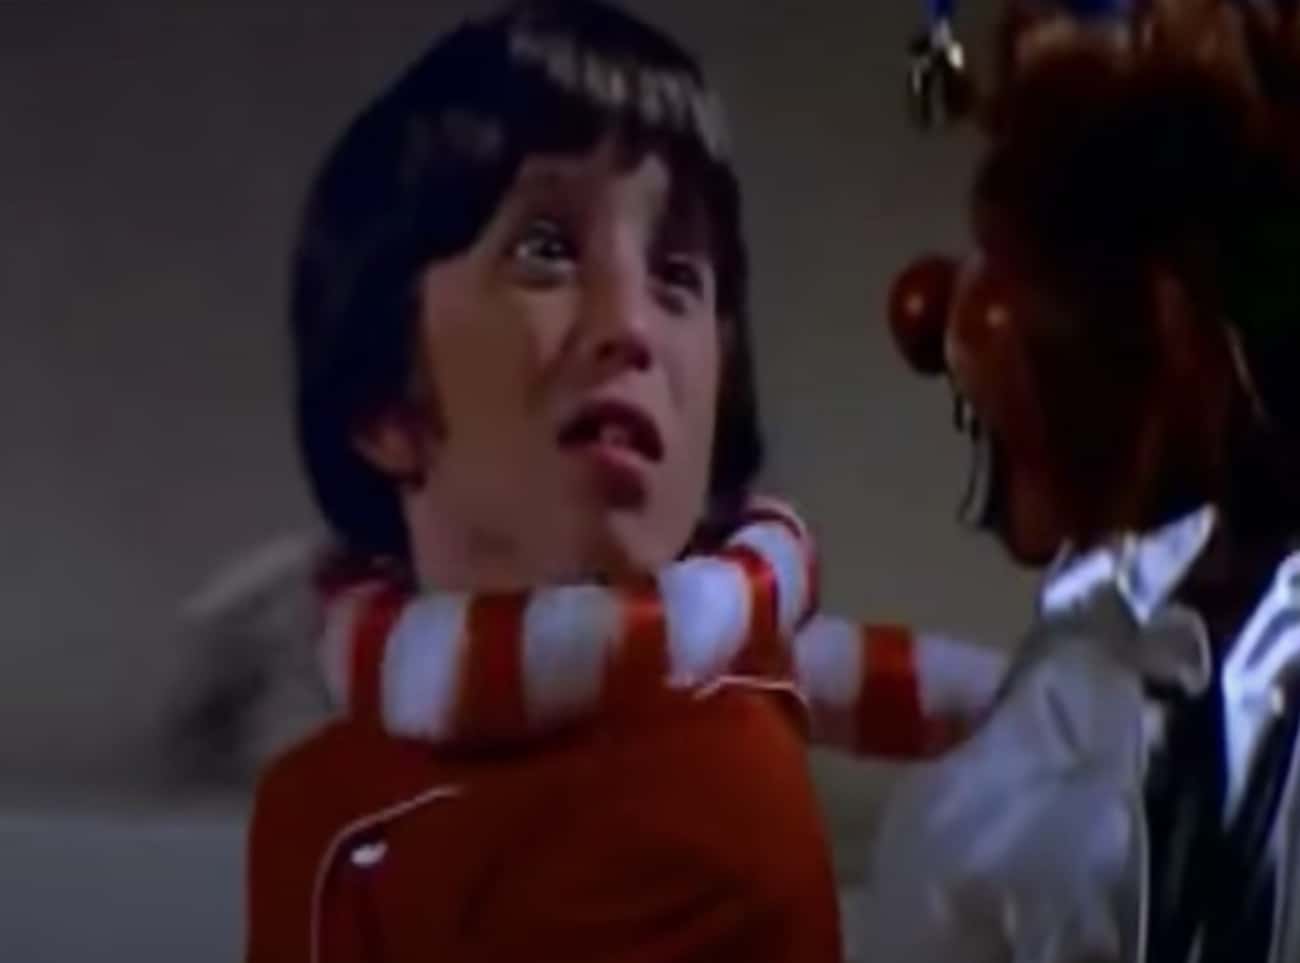 They're Here: 14 Small Details You May Have Missed In 'Poltergeist'